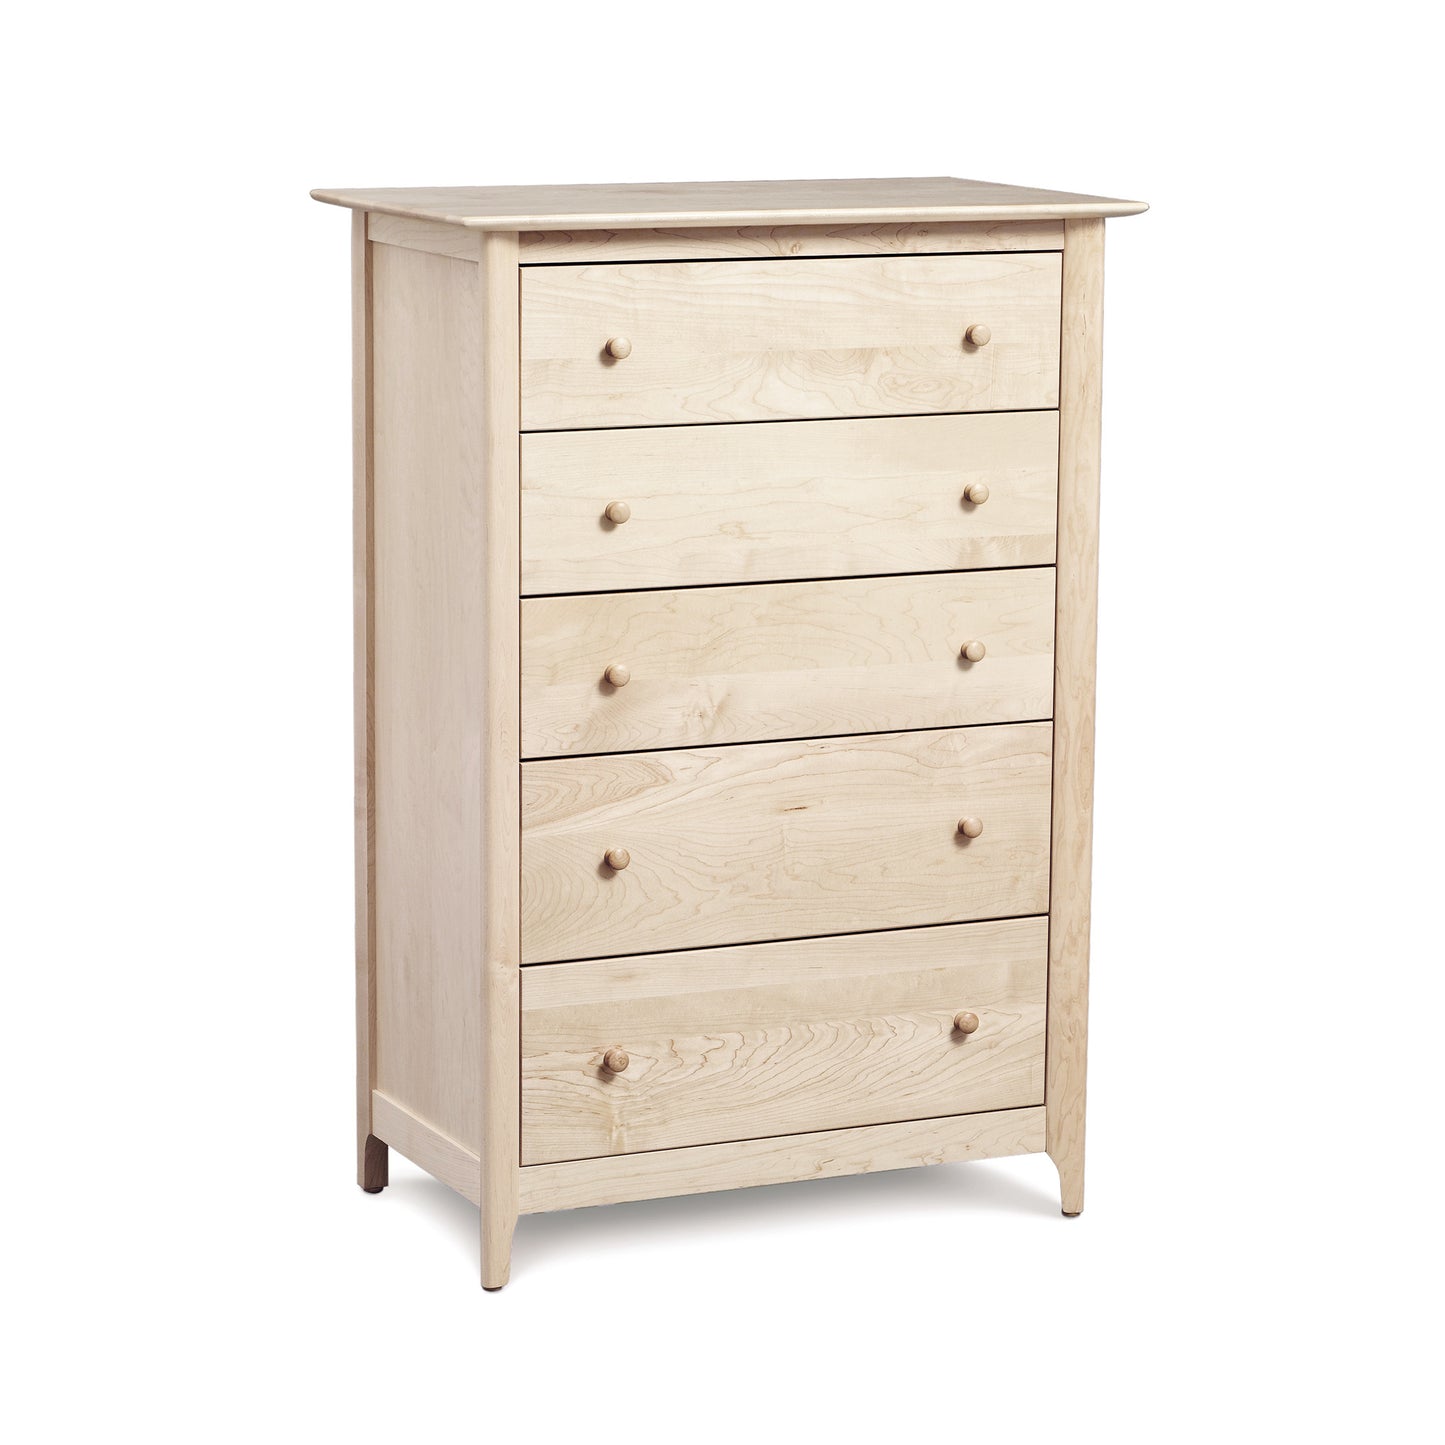 A small Copeland Furniture Sarah 5-Drawer Chest with a Shaker design, beautifully crafted from cherry wood, set against a clean white background.